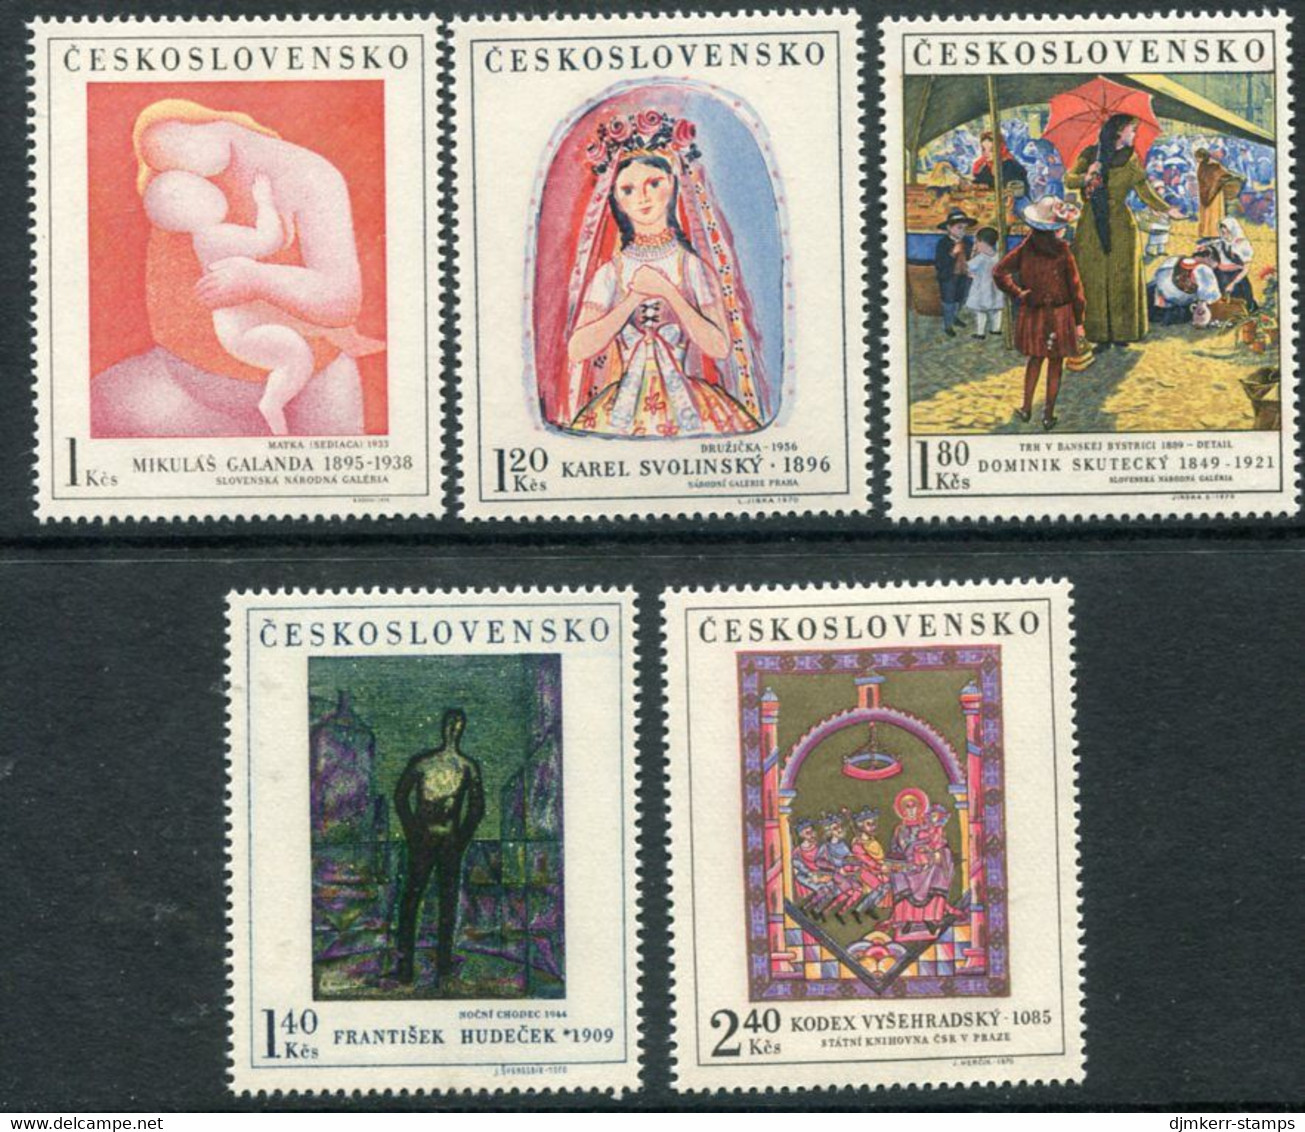 CZECHOSLOVAKIA 1970 National Gallery Paintings V MNH / ** Michel 1965-69 - Ungebraucht